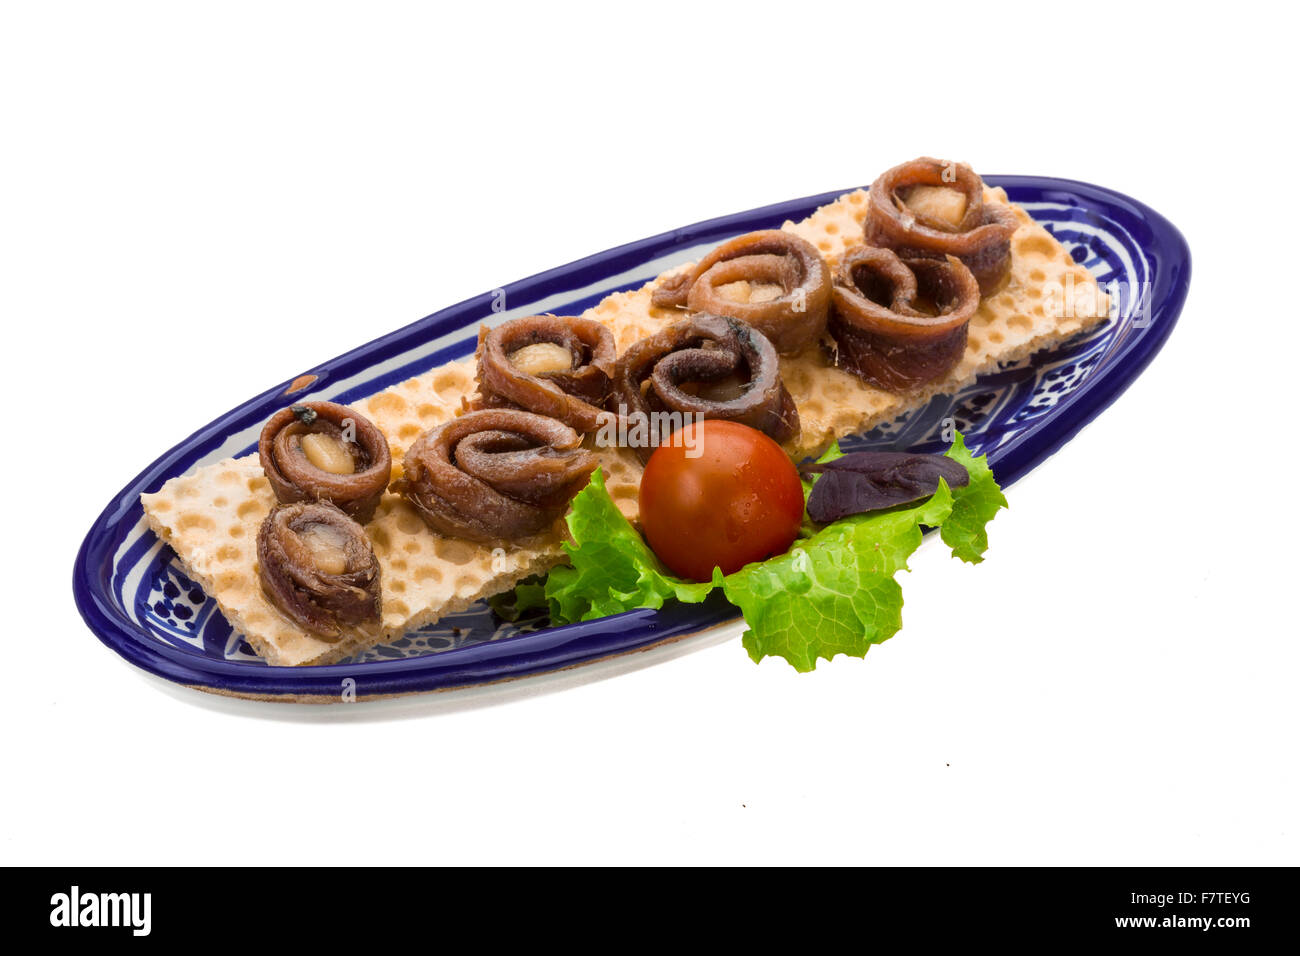 Anchovy snack with salad and tomato Stock Photo